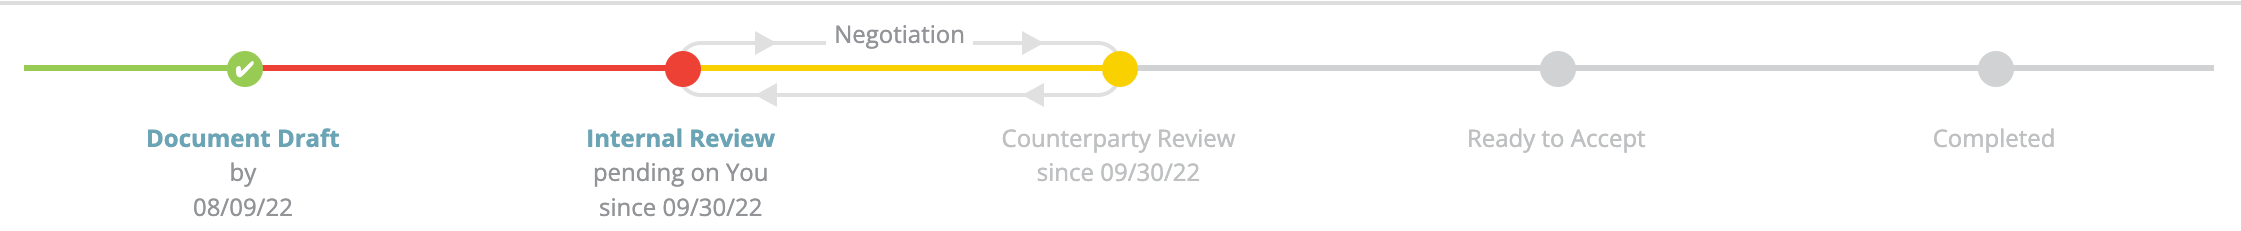 05-counterparty-and-internal-review.png